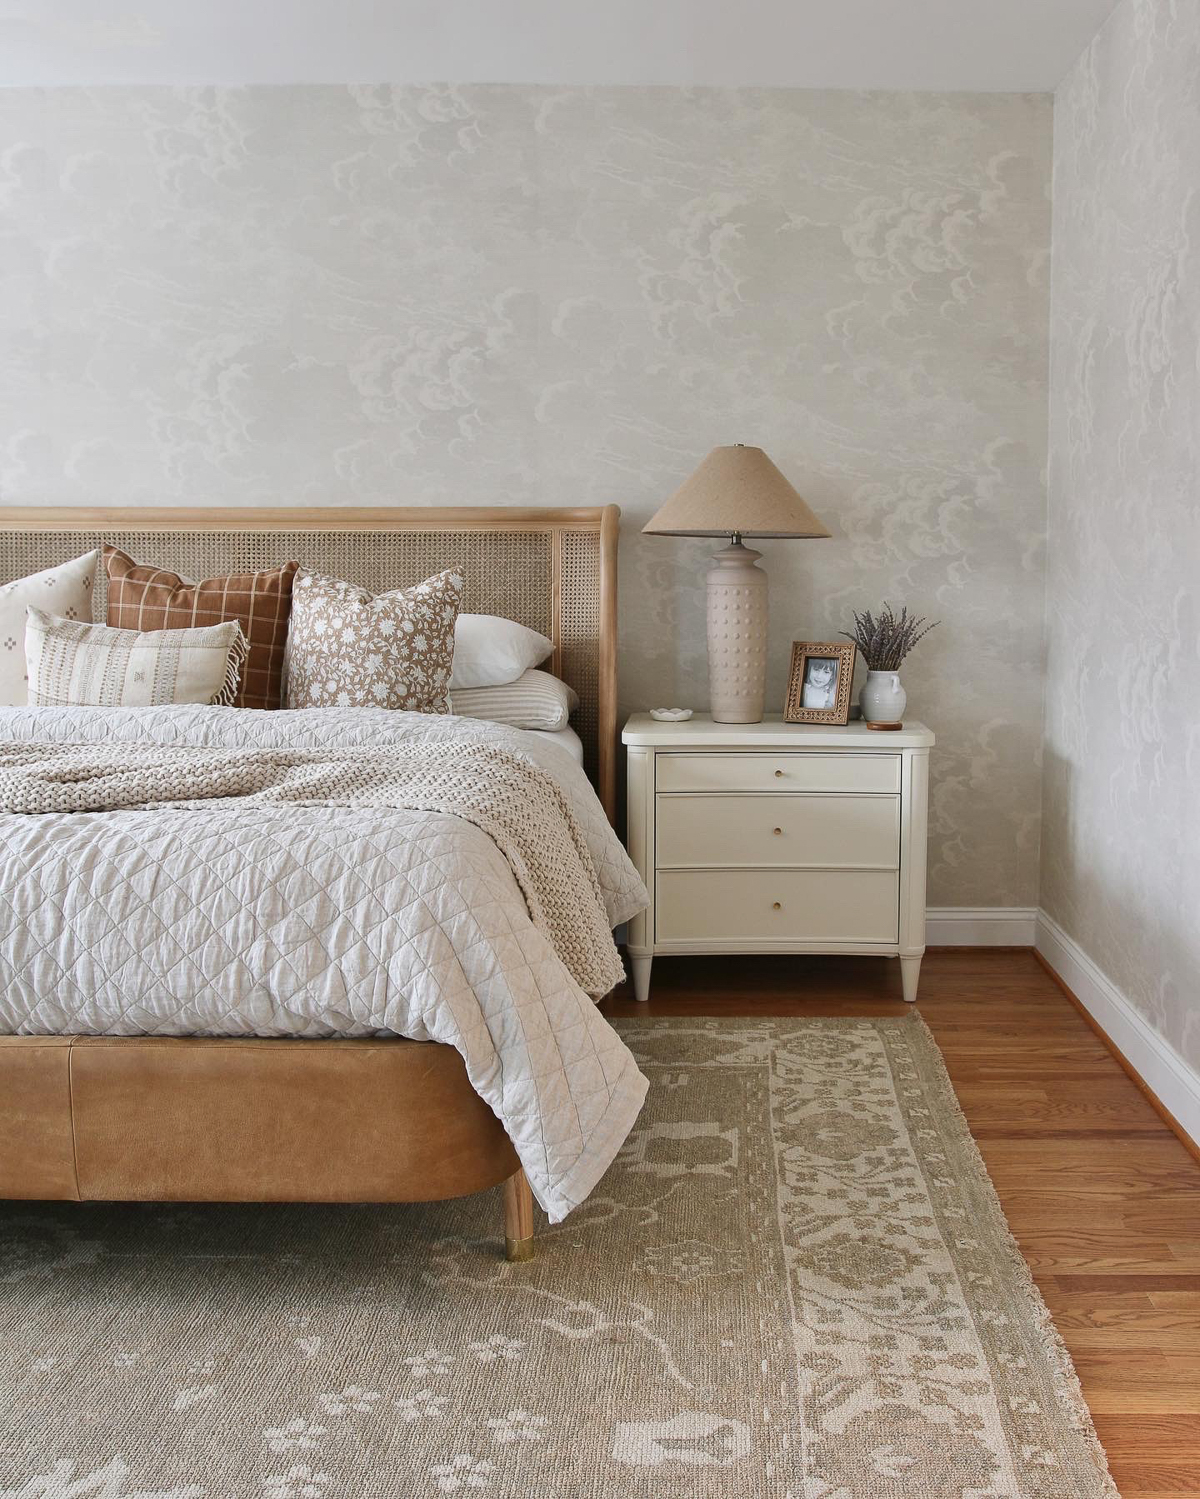 Bedroom with neutral cloud wallpaper and cane headboard. Linen quilt and plaid and floral throw pillows. White painted nightstand with tall hobnail ceramic lamp with burlap tapered shade. Vintage hand knotted rug